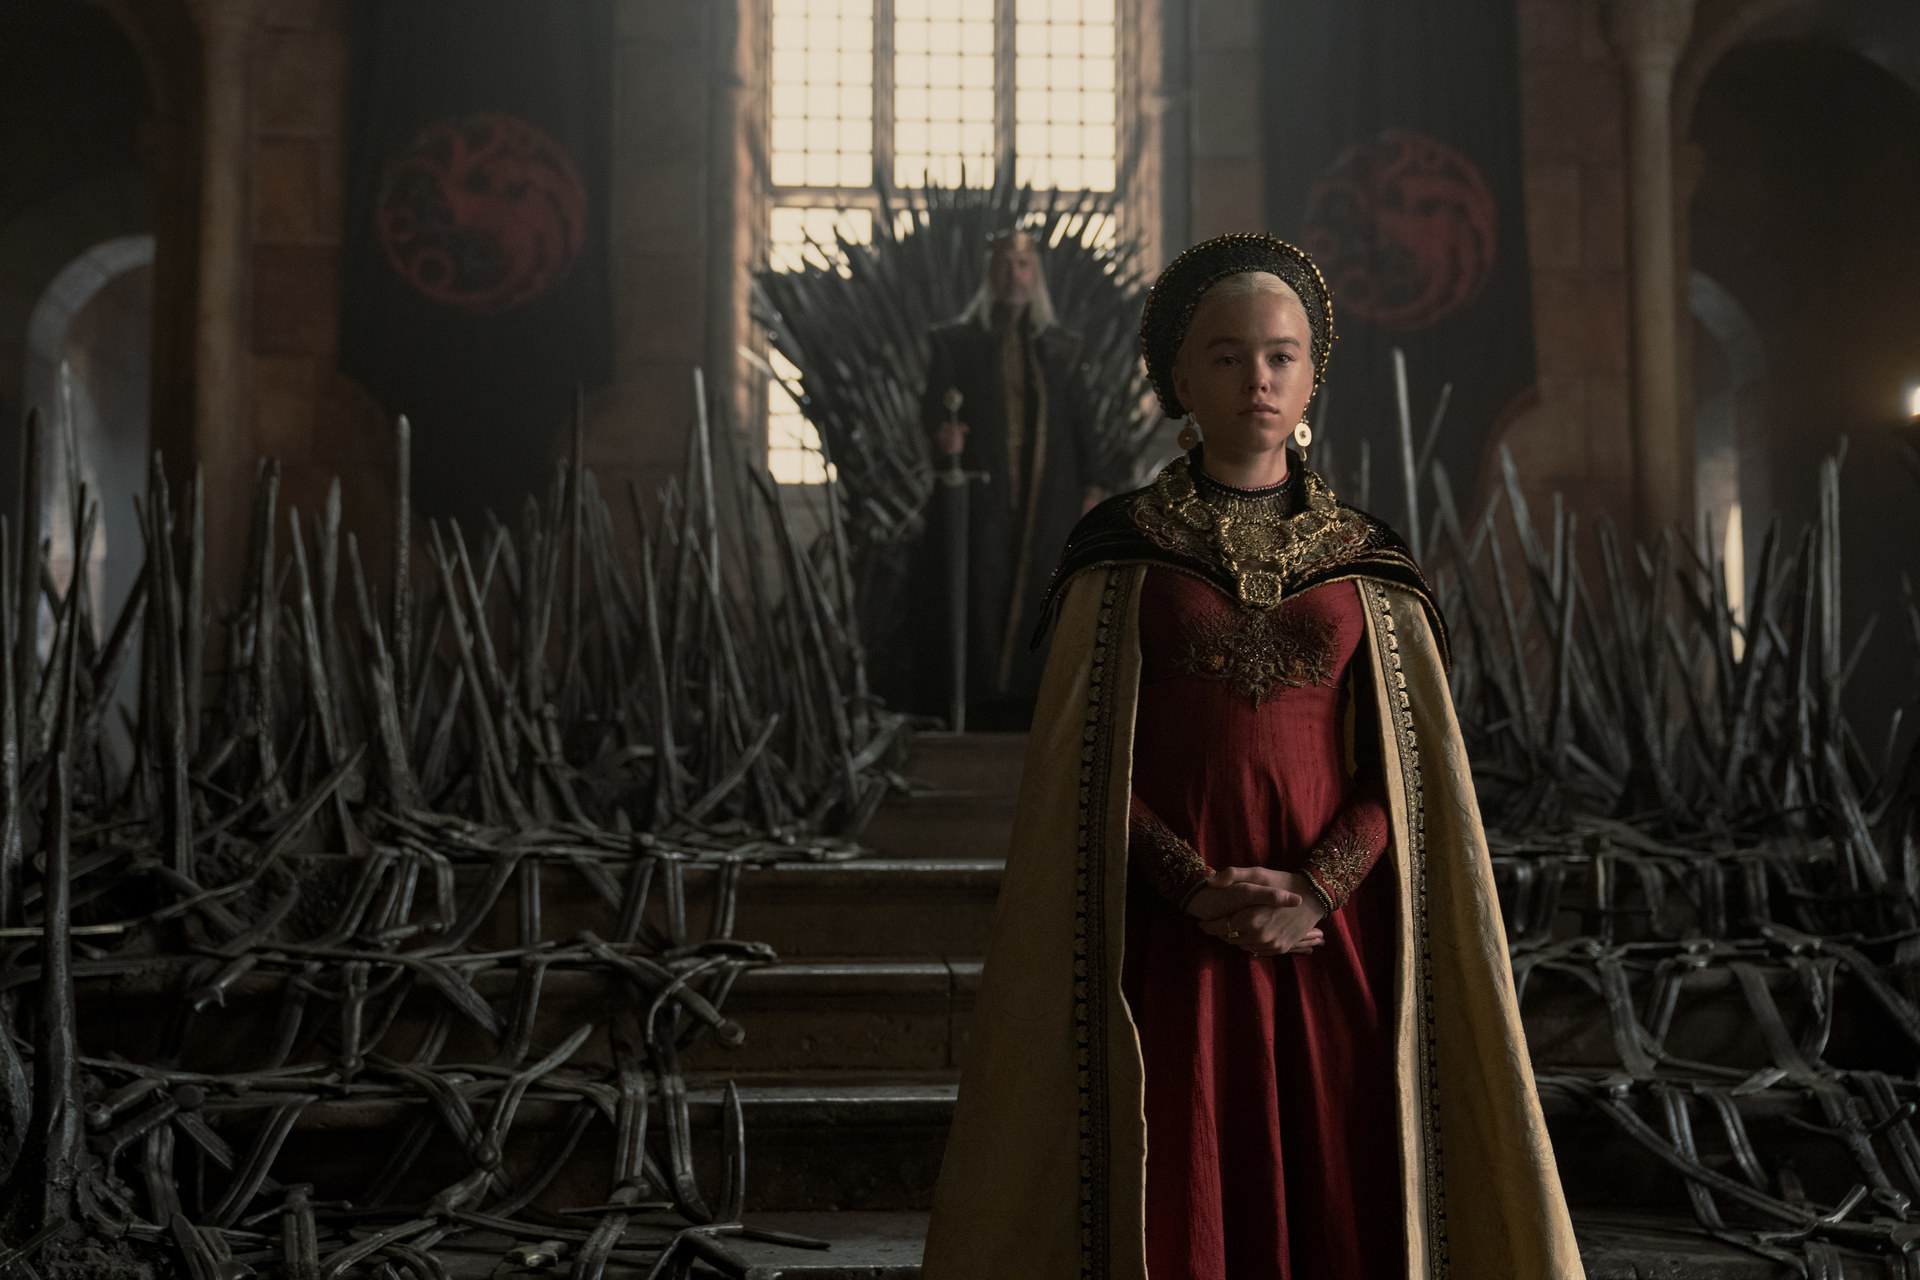 Rhaenyra at her coronation in a red dress with a black and gold cape